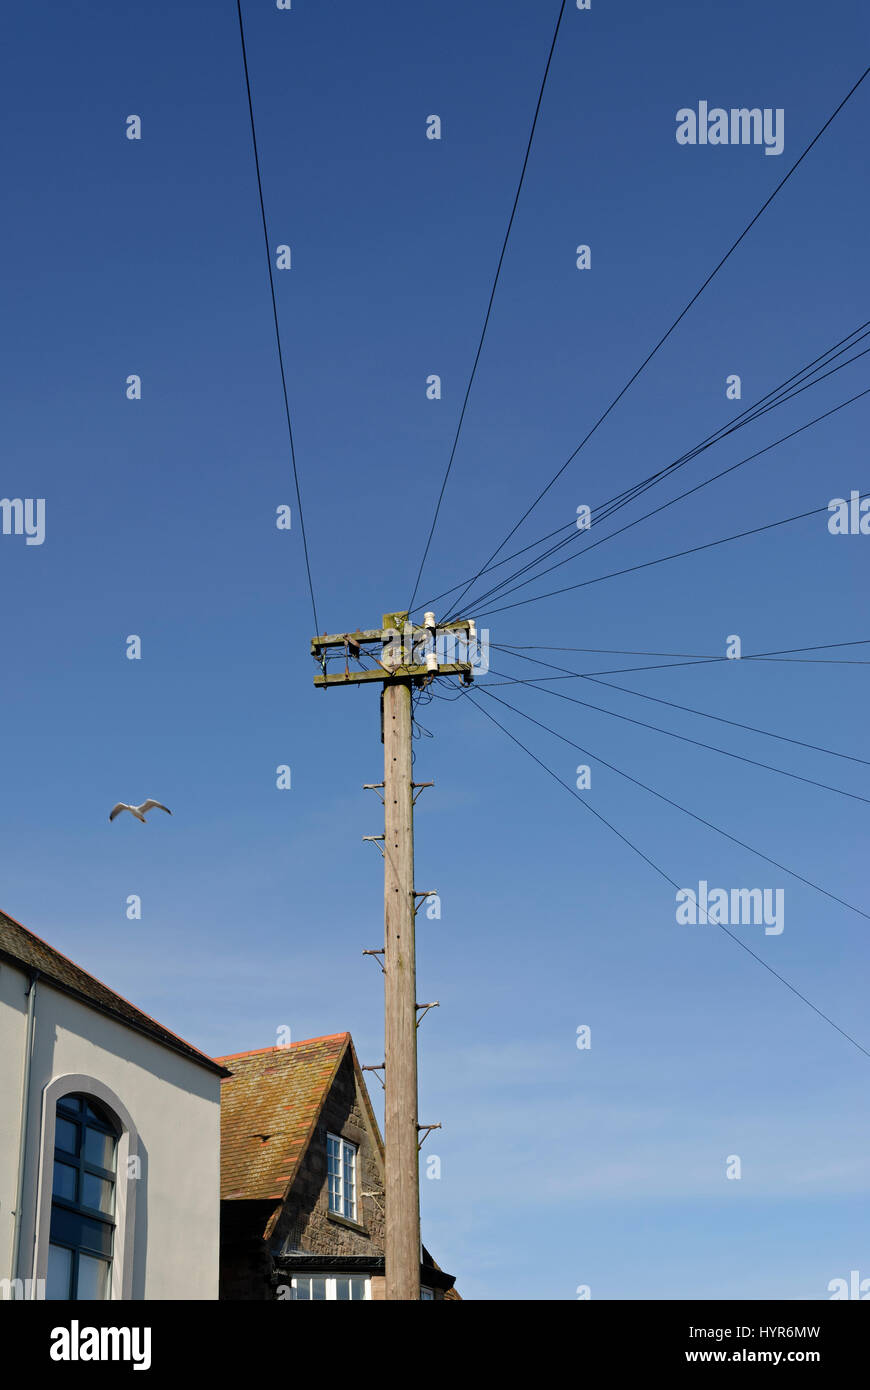 Telegraph pole and telephone wires Stock Photo